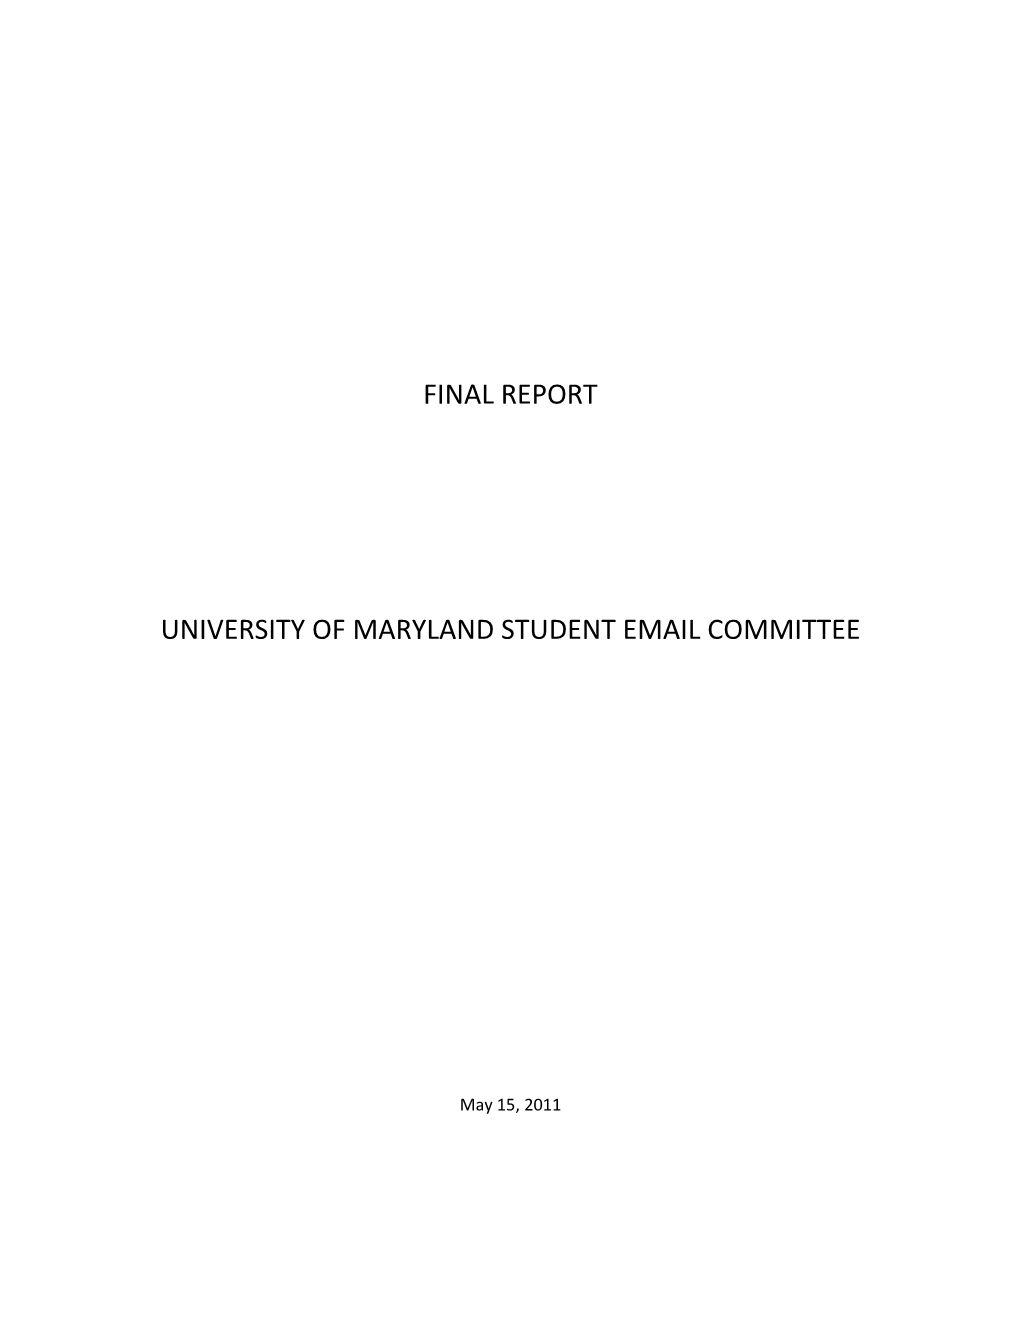 Final Report University of Maryland Student Email